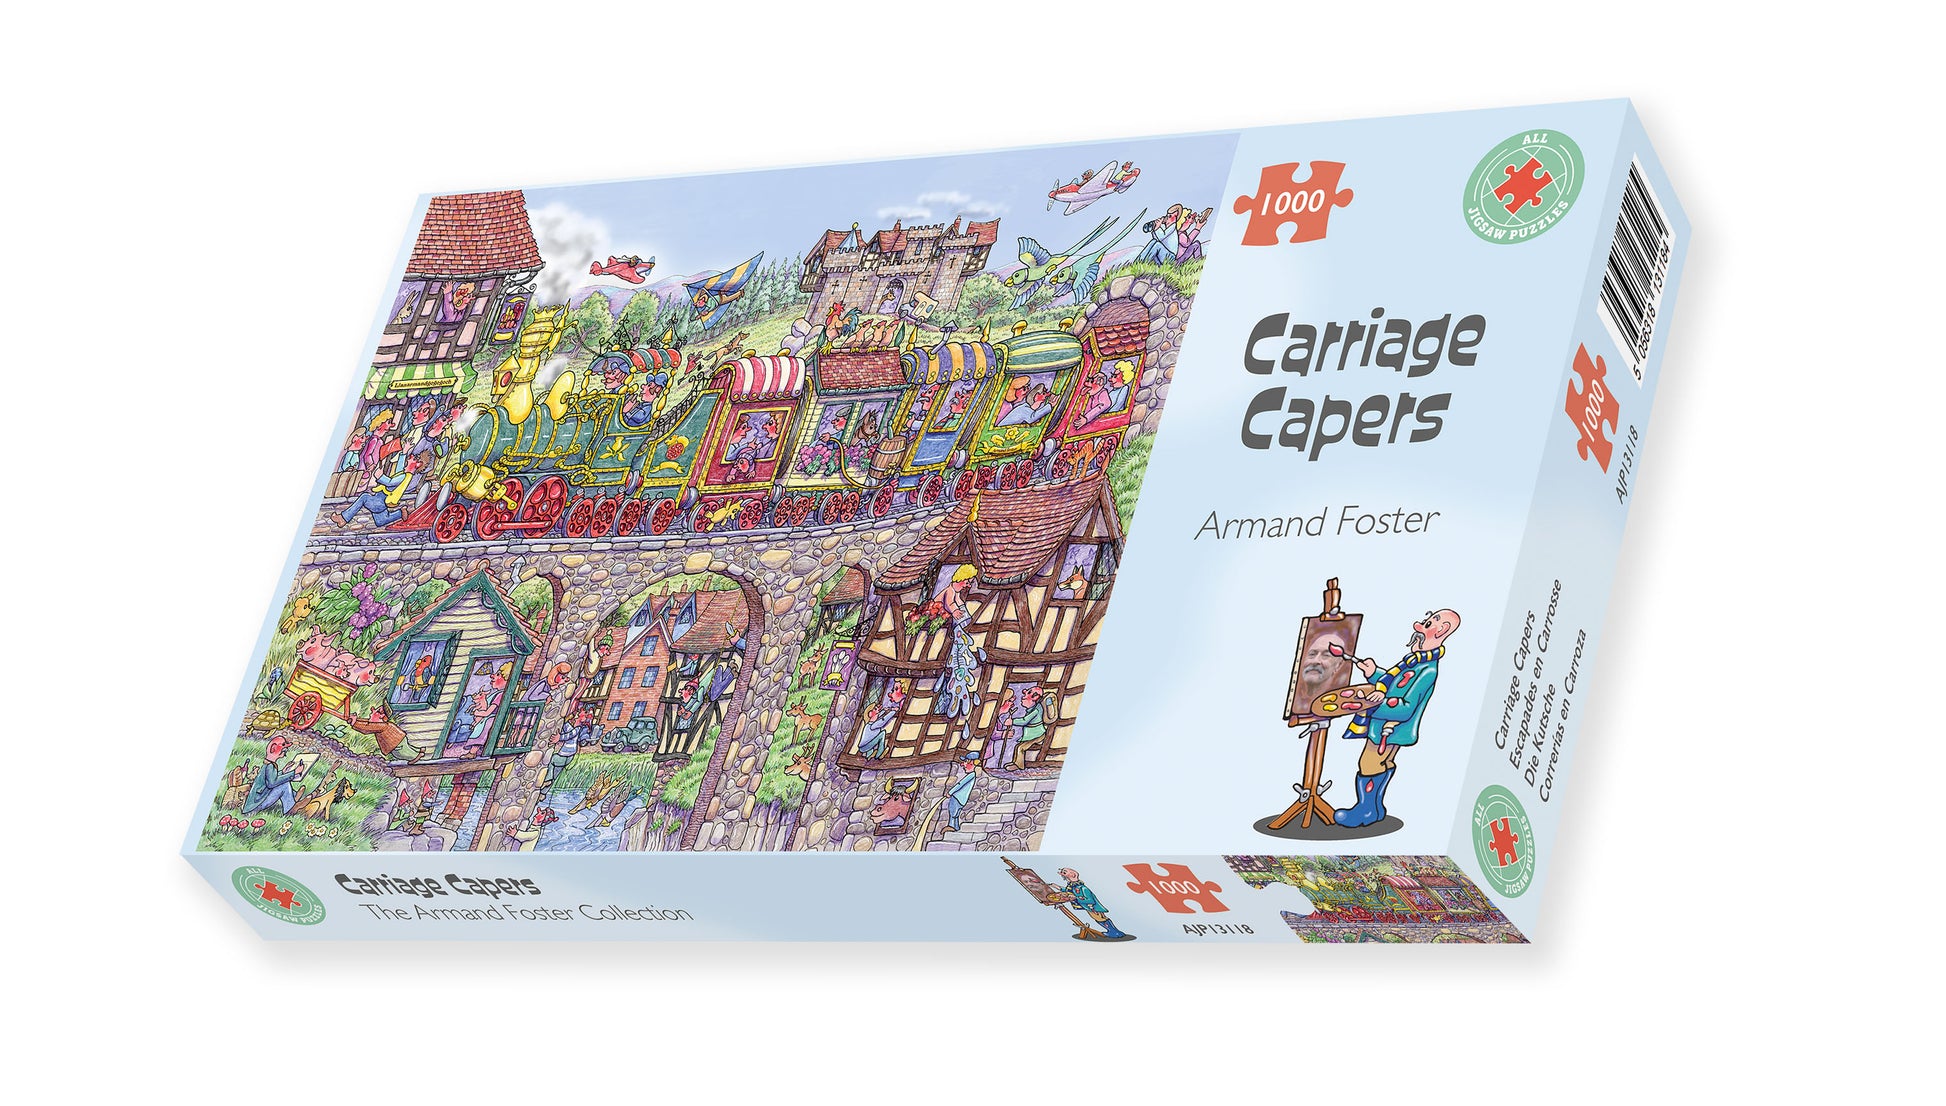 Carriage Capers 1000 Piece Jigsaw Puzzle box